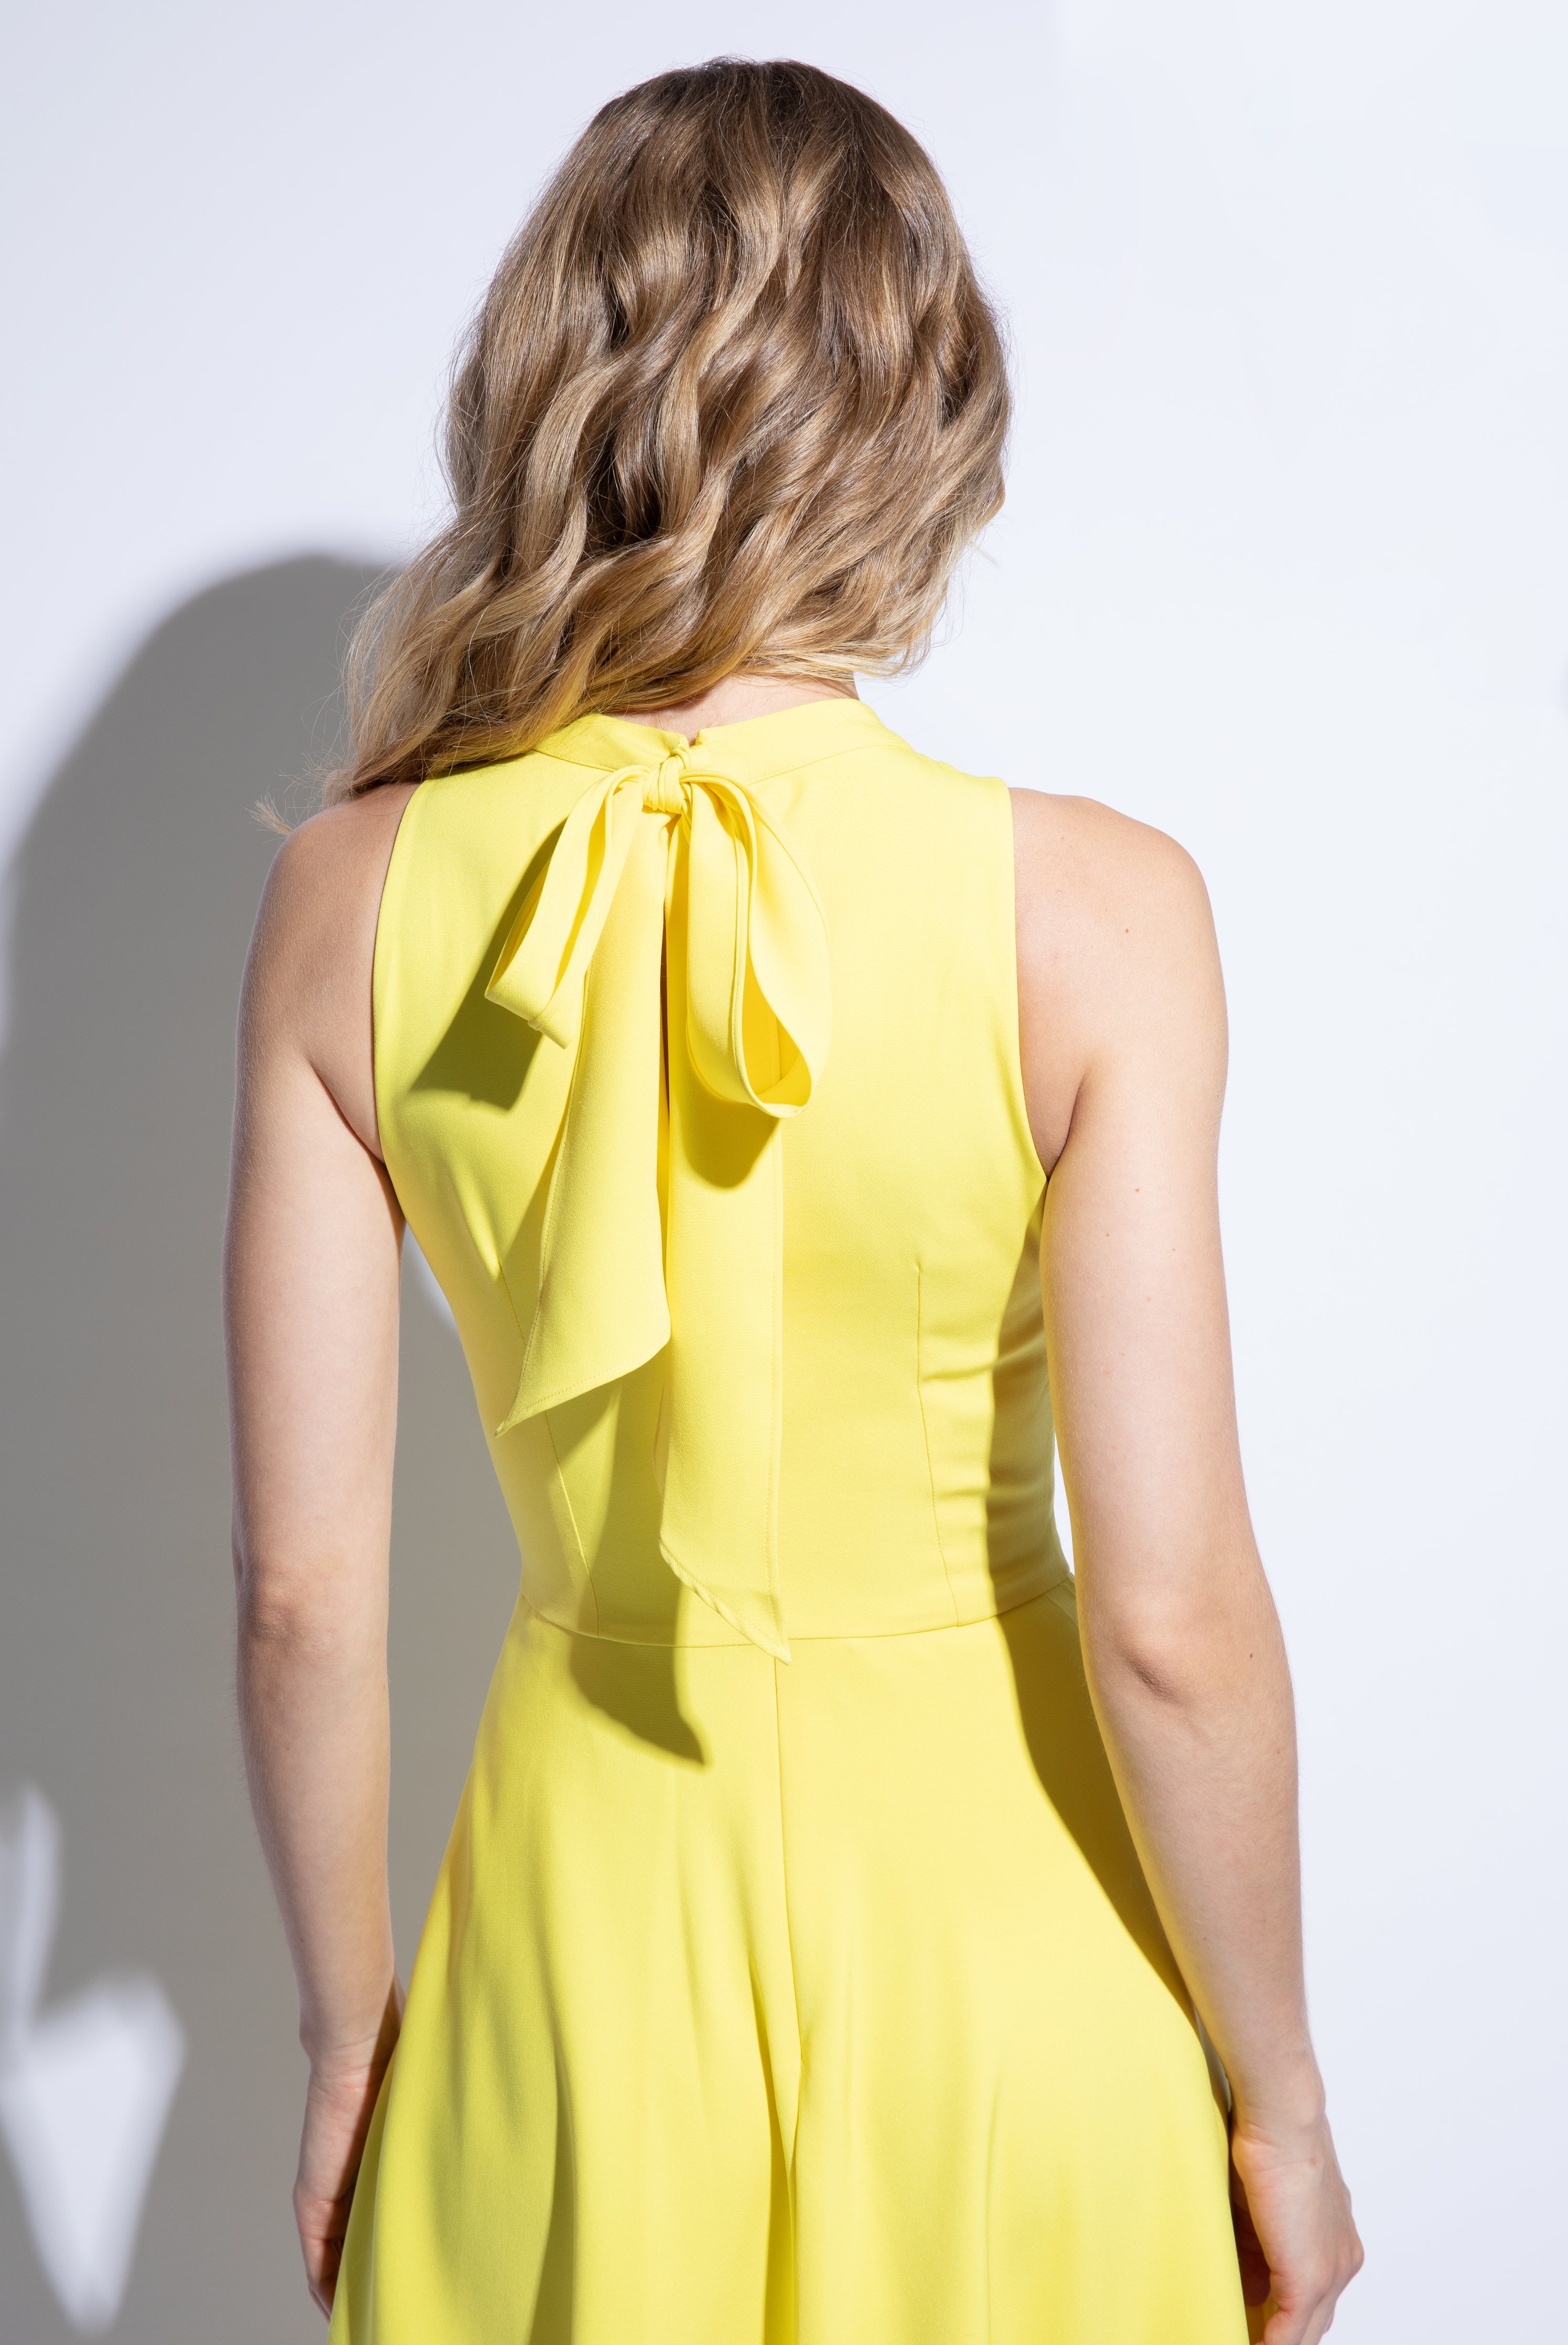 Back detailed view of yellow racer back summer dress with bow detail